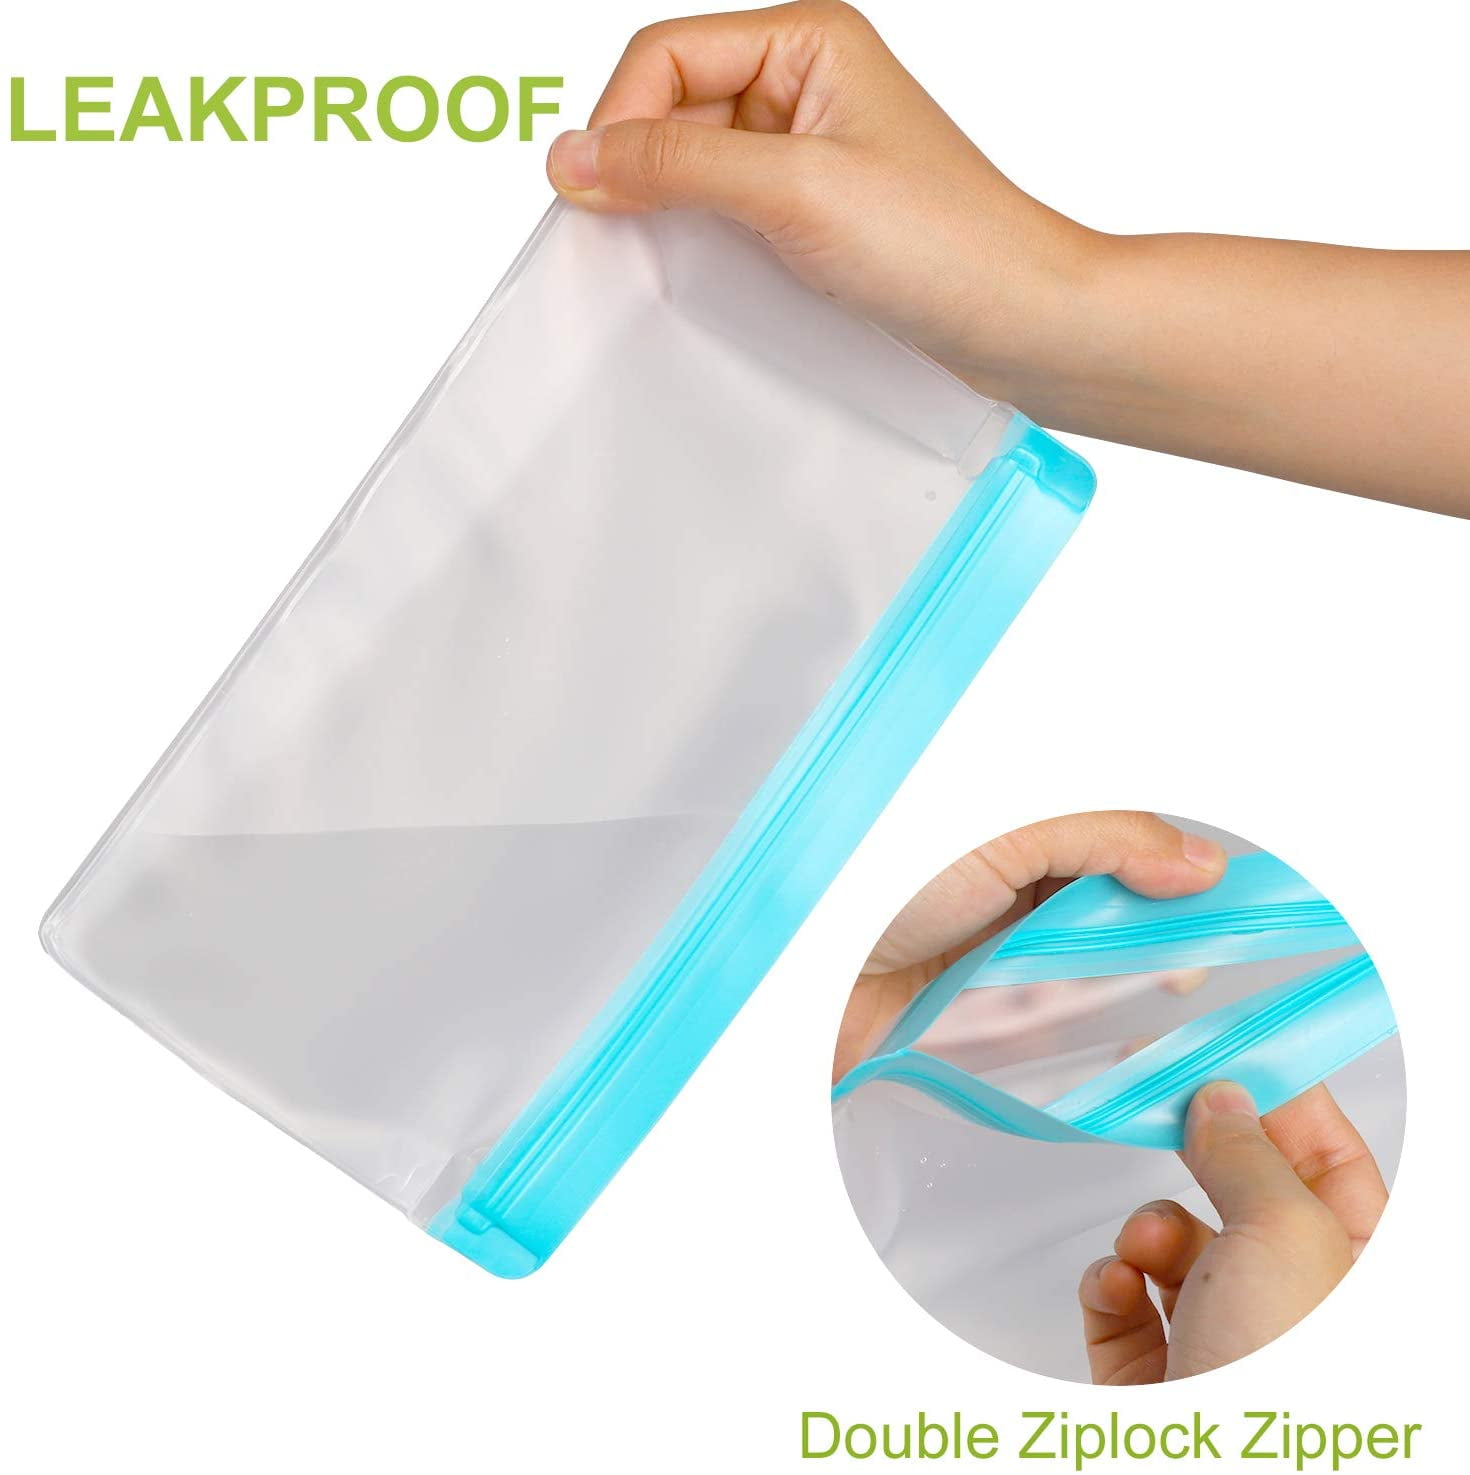 Dropship 5 Pack Leakproof Freezer Gallon Bags BPA Free- Extra Thick Durable  Reusable Storage Bags - Reusable Snack Bags For Food Fruit Travel Storage  Home Organization to Sell Online at a Lower